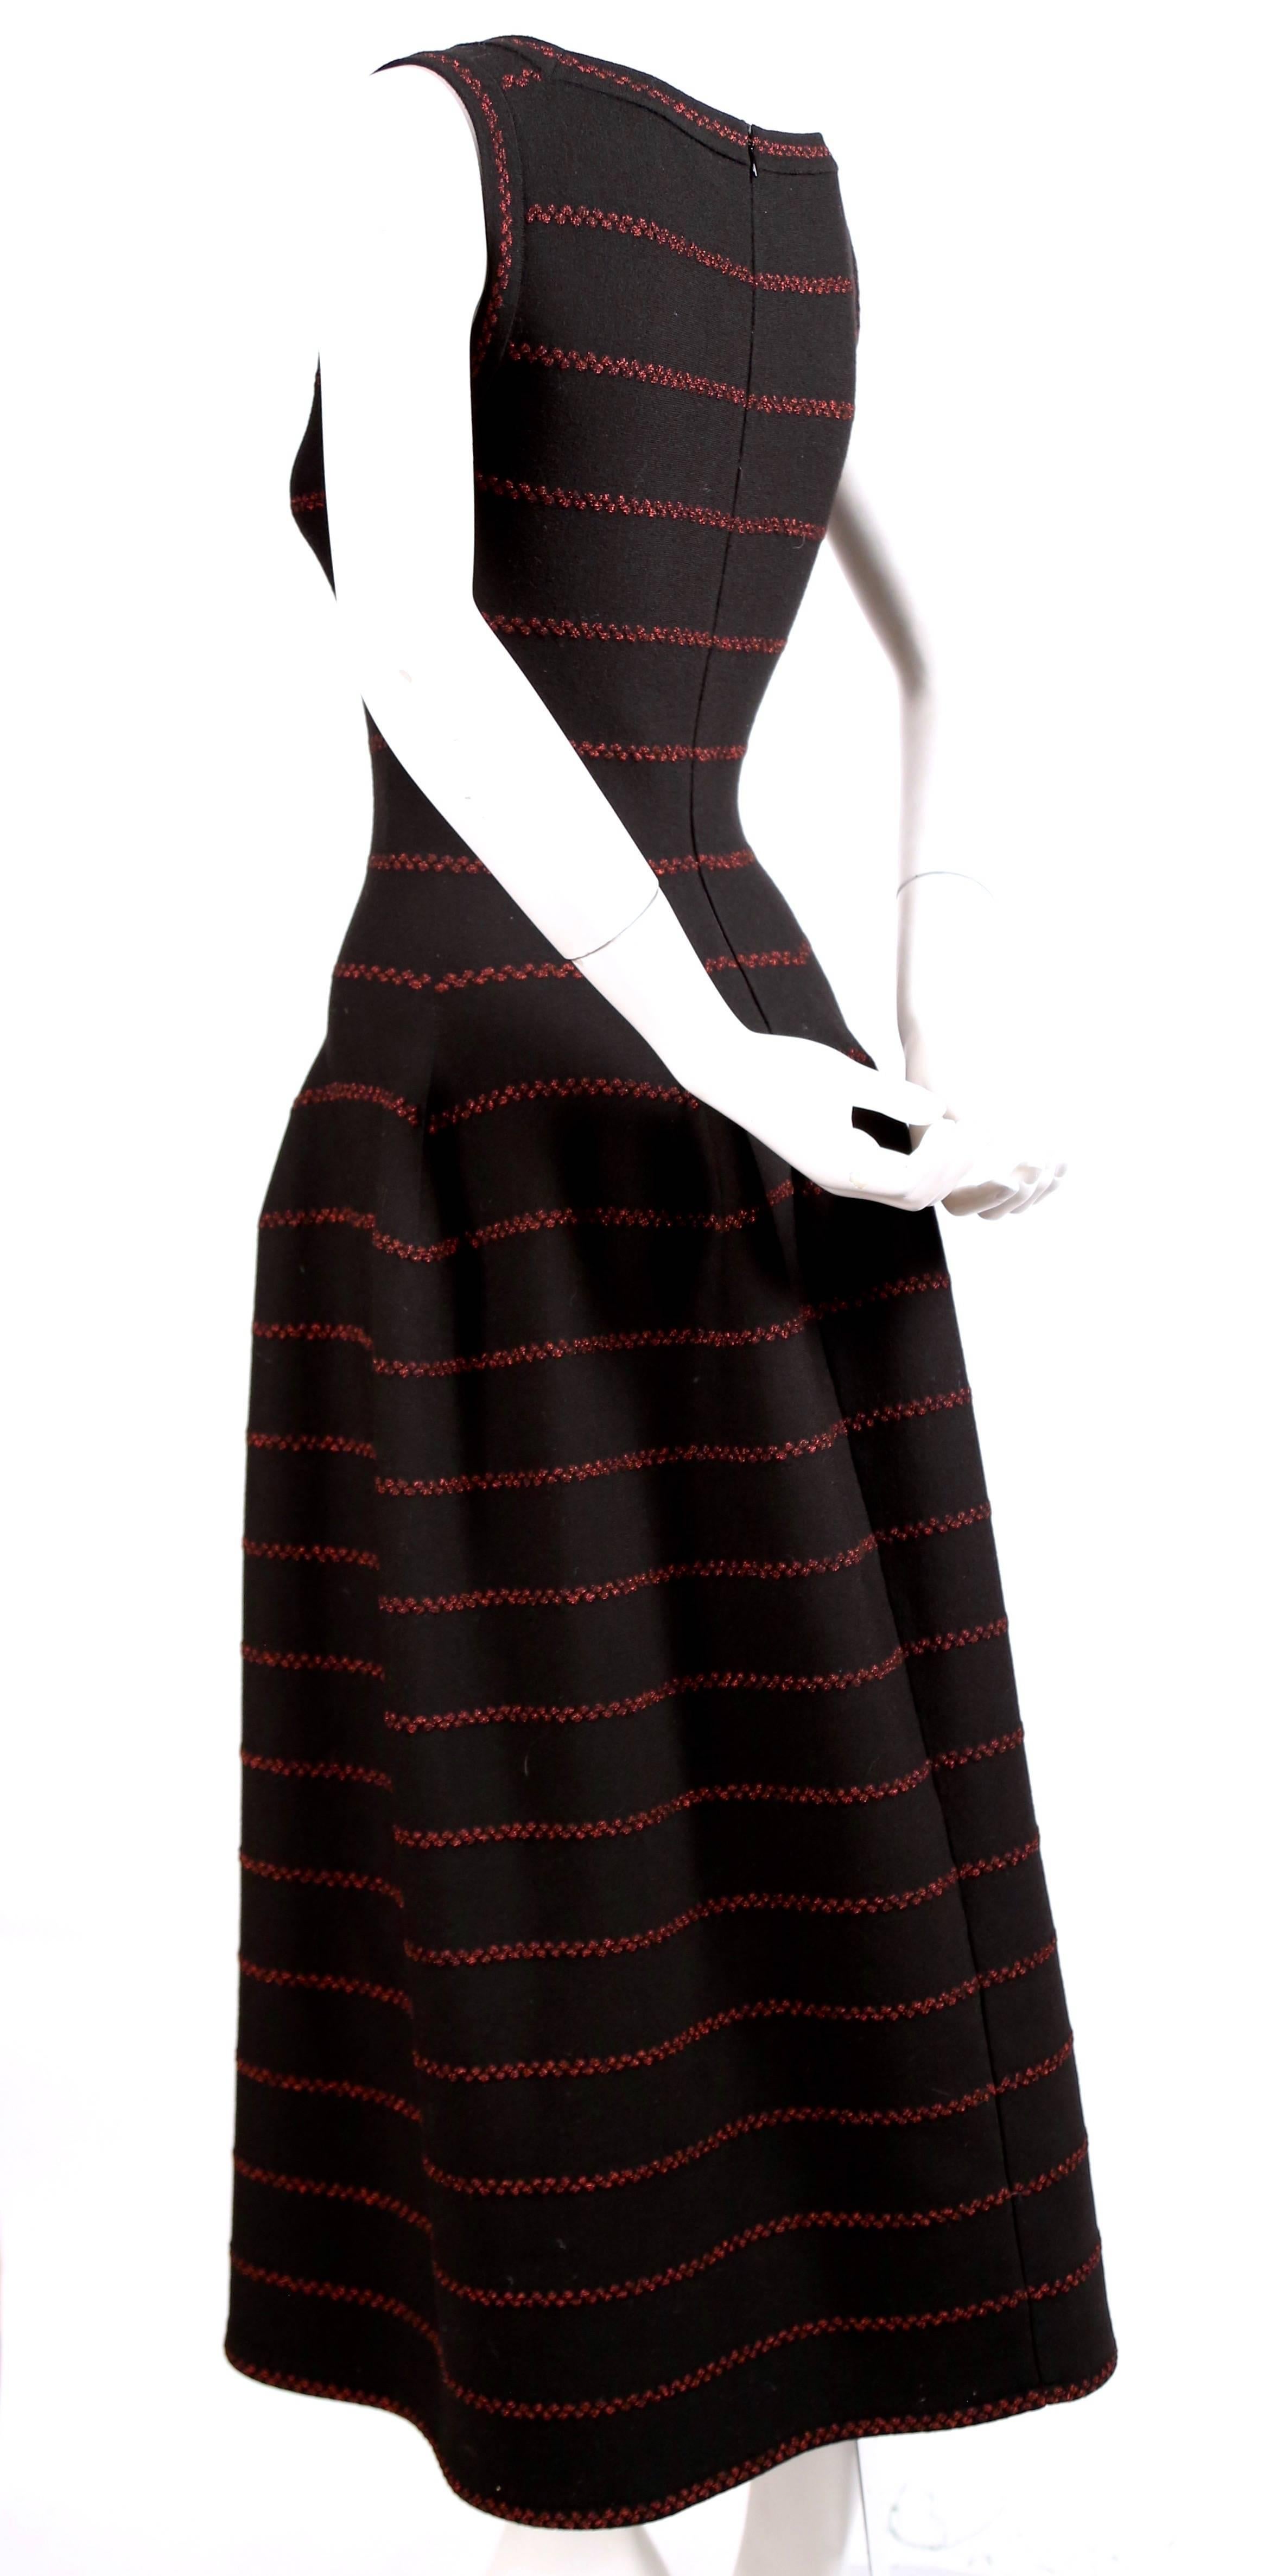 Long black knit dress with red lurex detail designed by Azzedine Alaia. Square boat neckline. Beautiful seaming creates the full skit. French size 40 which fits a US 4-6. Approximate measurements (unstretched): shoulder 14